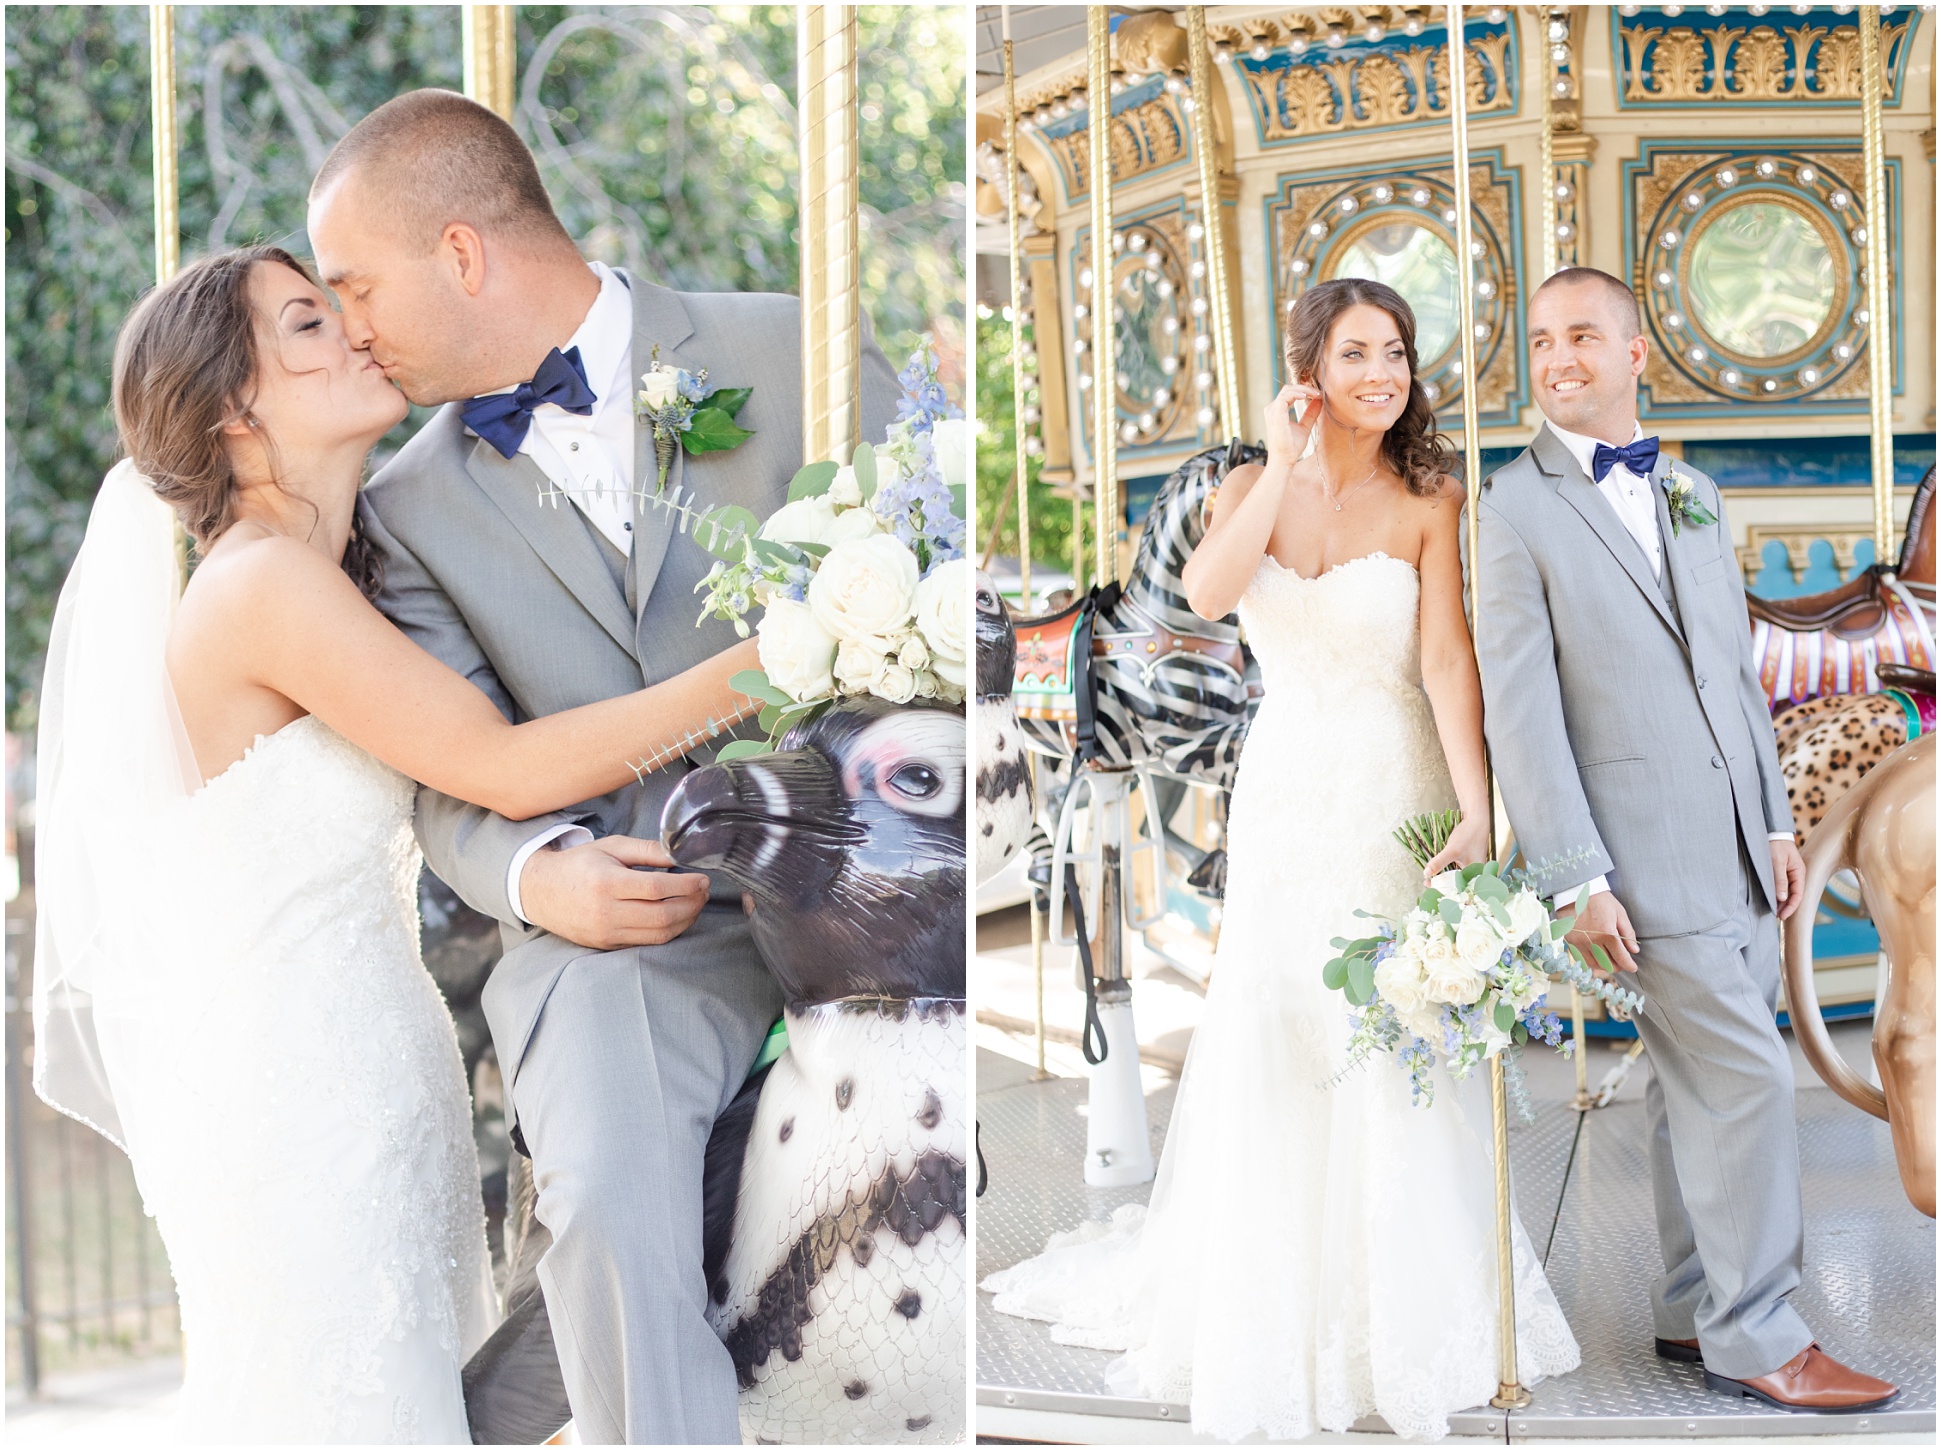 Two photographs of the bride and groom hanging out on the carousel at the Maryland Zoo for portraits